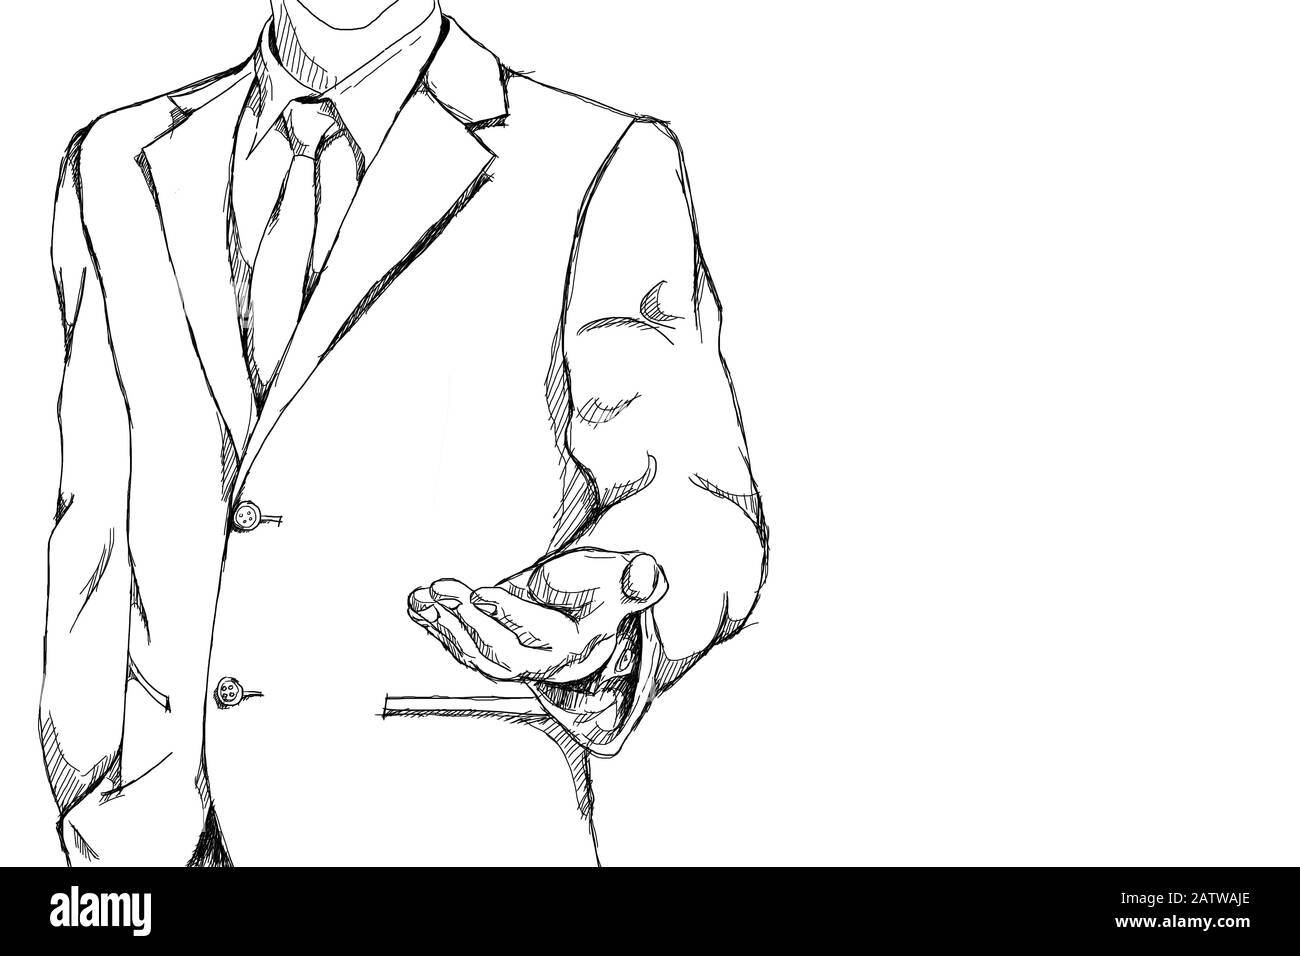 Drawing Sketch Simple Line Of Business Man With Open Palm Hand Action For Invite Meaning On Friendly Business With Copy Space Stock Photo Alamy